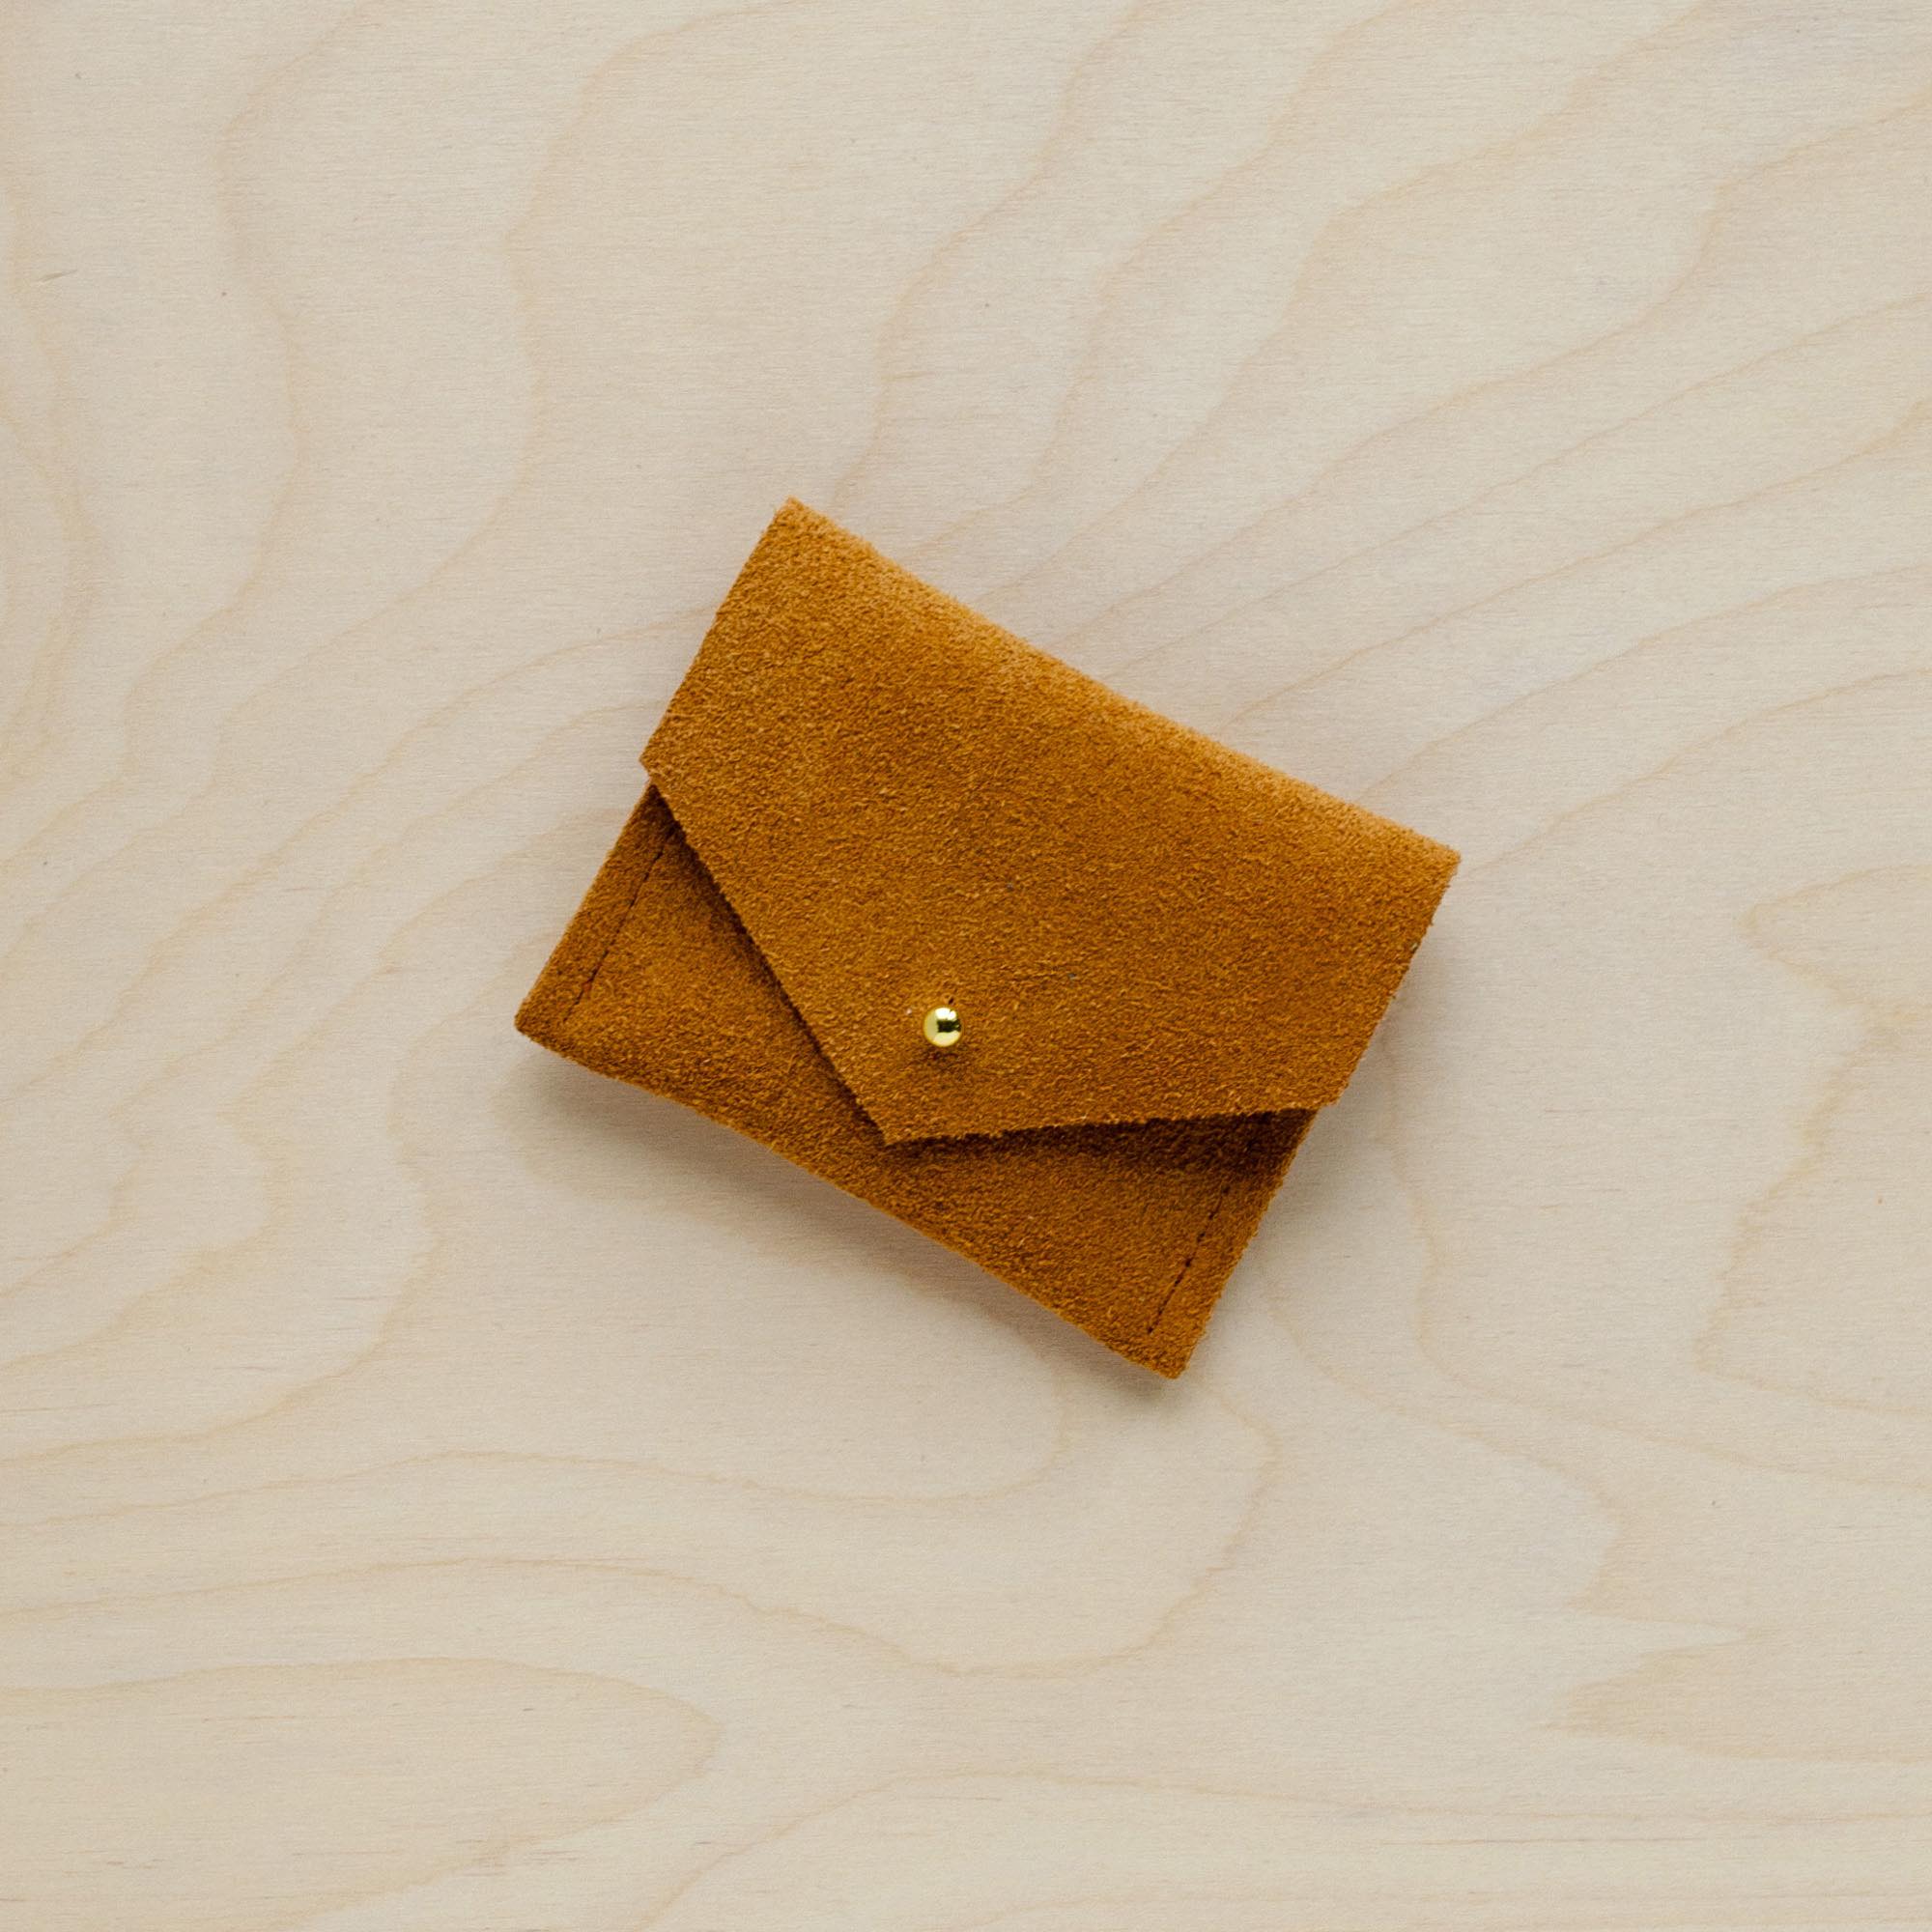 A suede Stitch Markers pouch in Tan brown. Complete with a stud for secure closing.